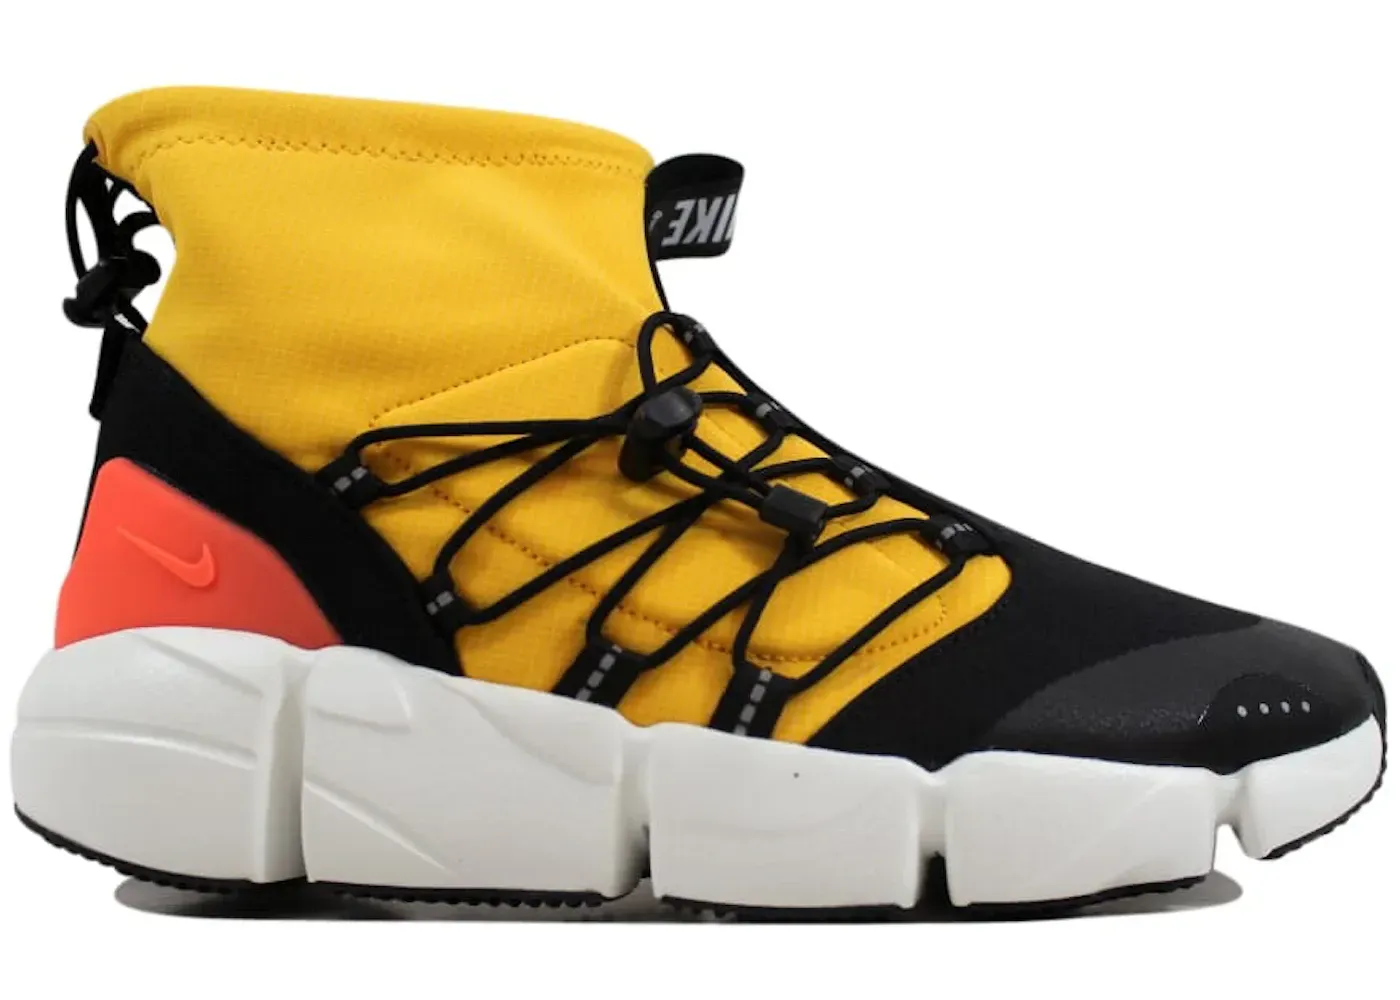 Nike Air Footscape Mid Utility DM University Gold